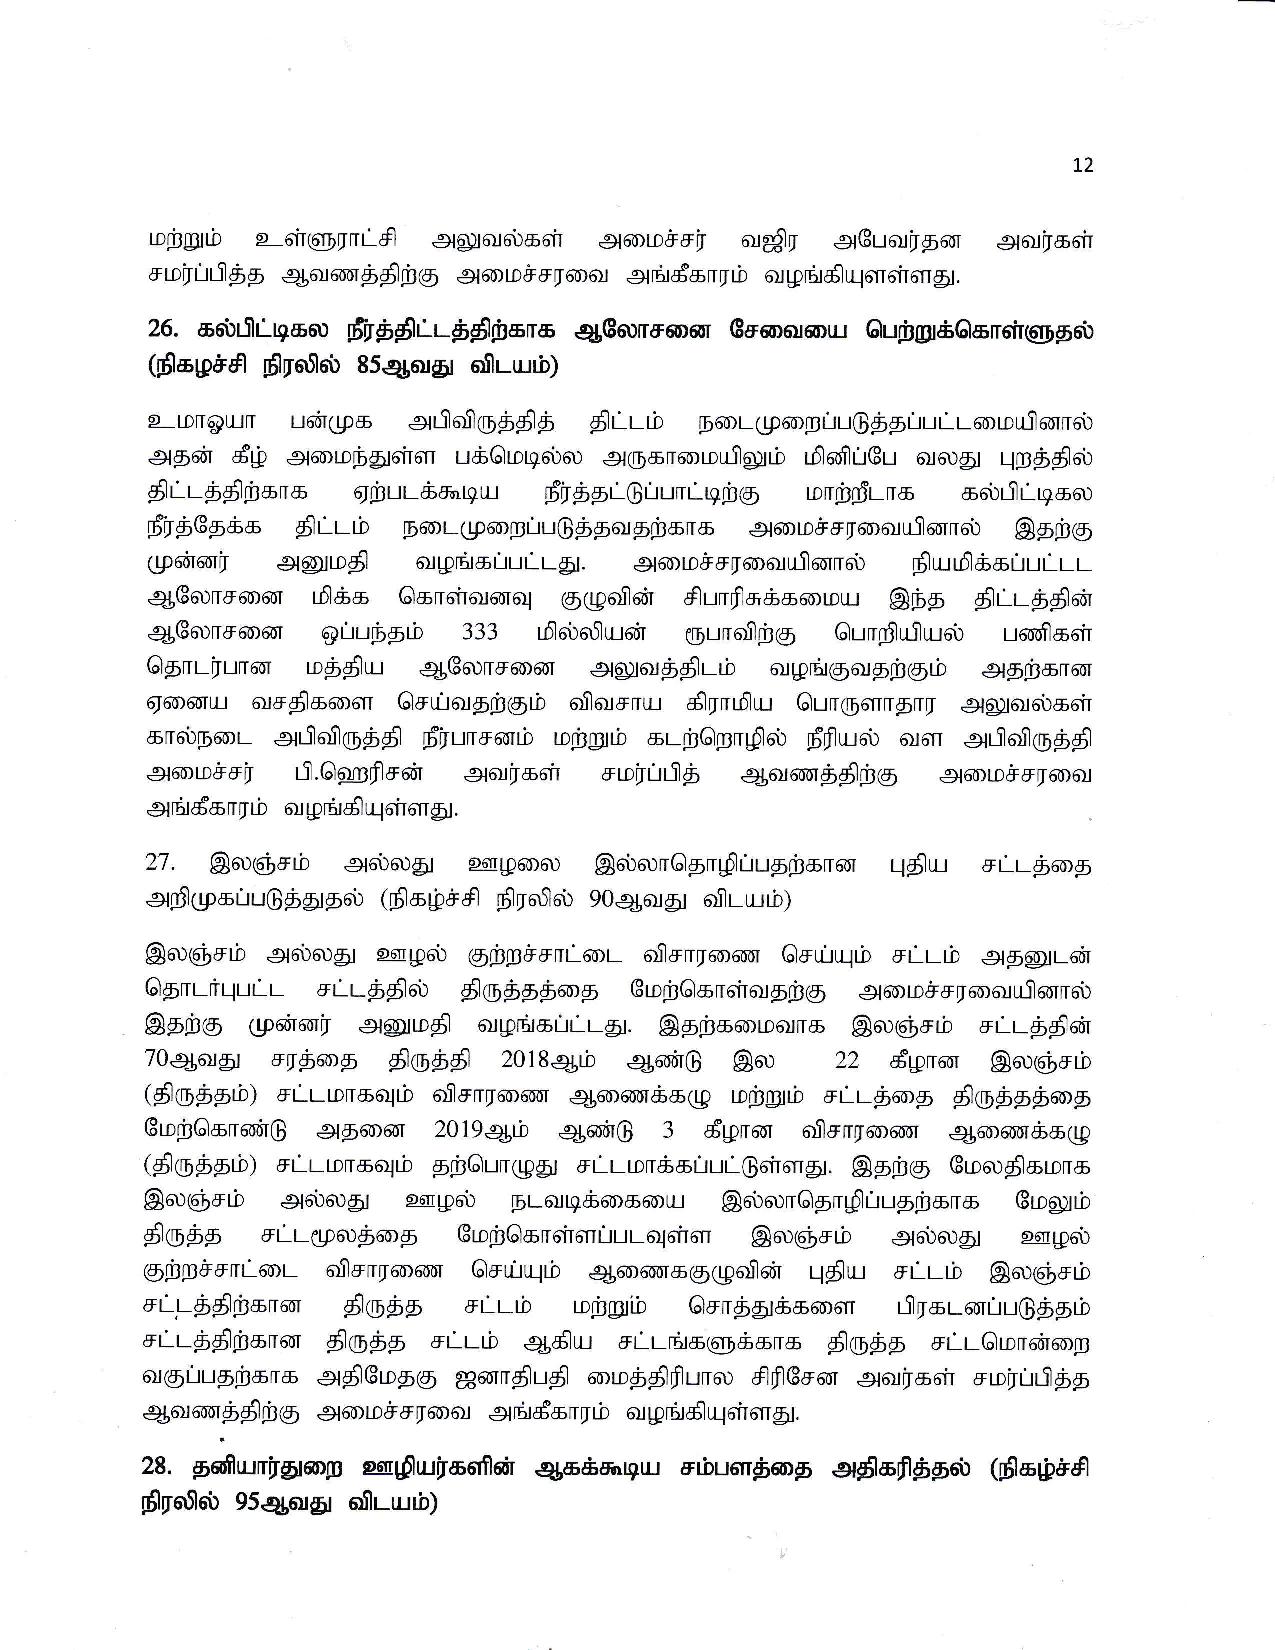 Cabinet Decision on 30.04.2019 T page 012